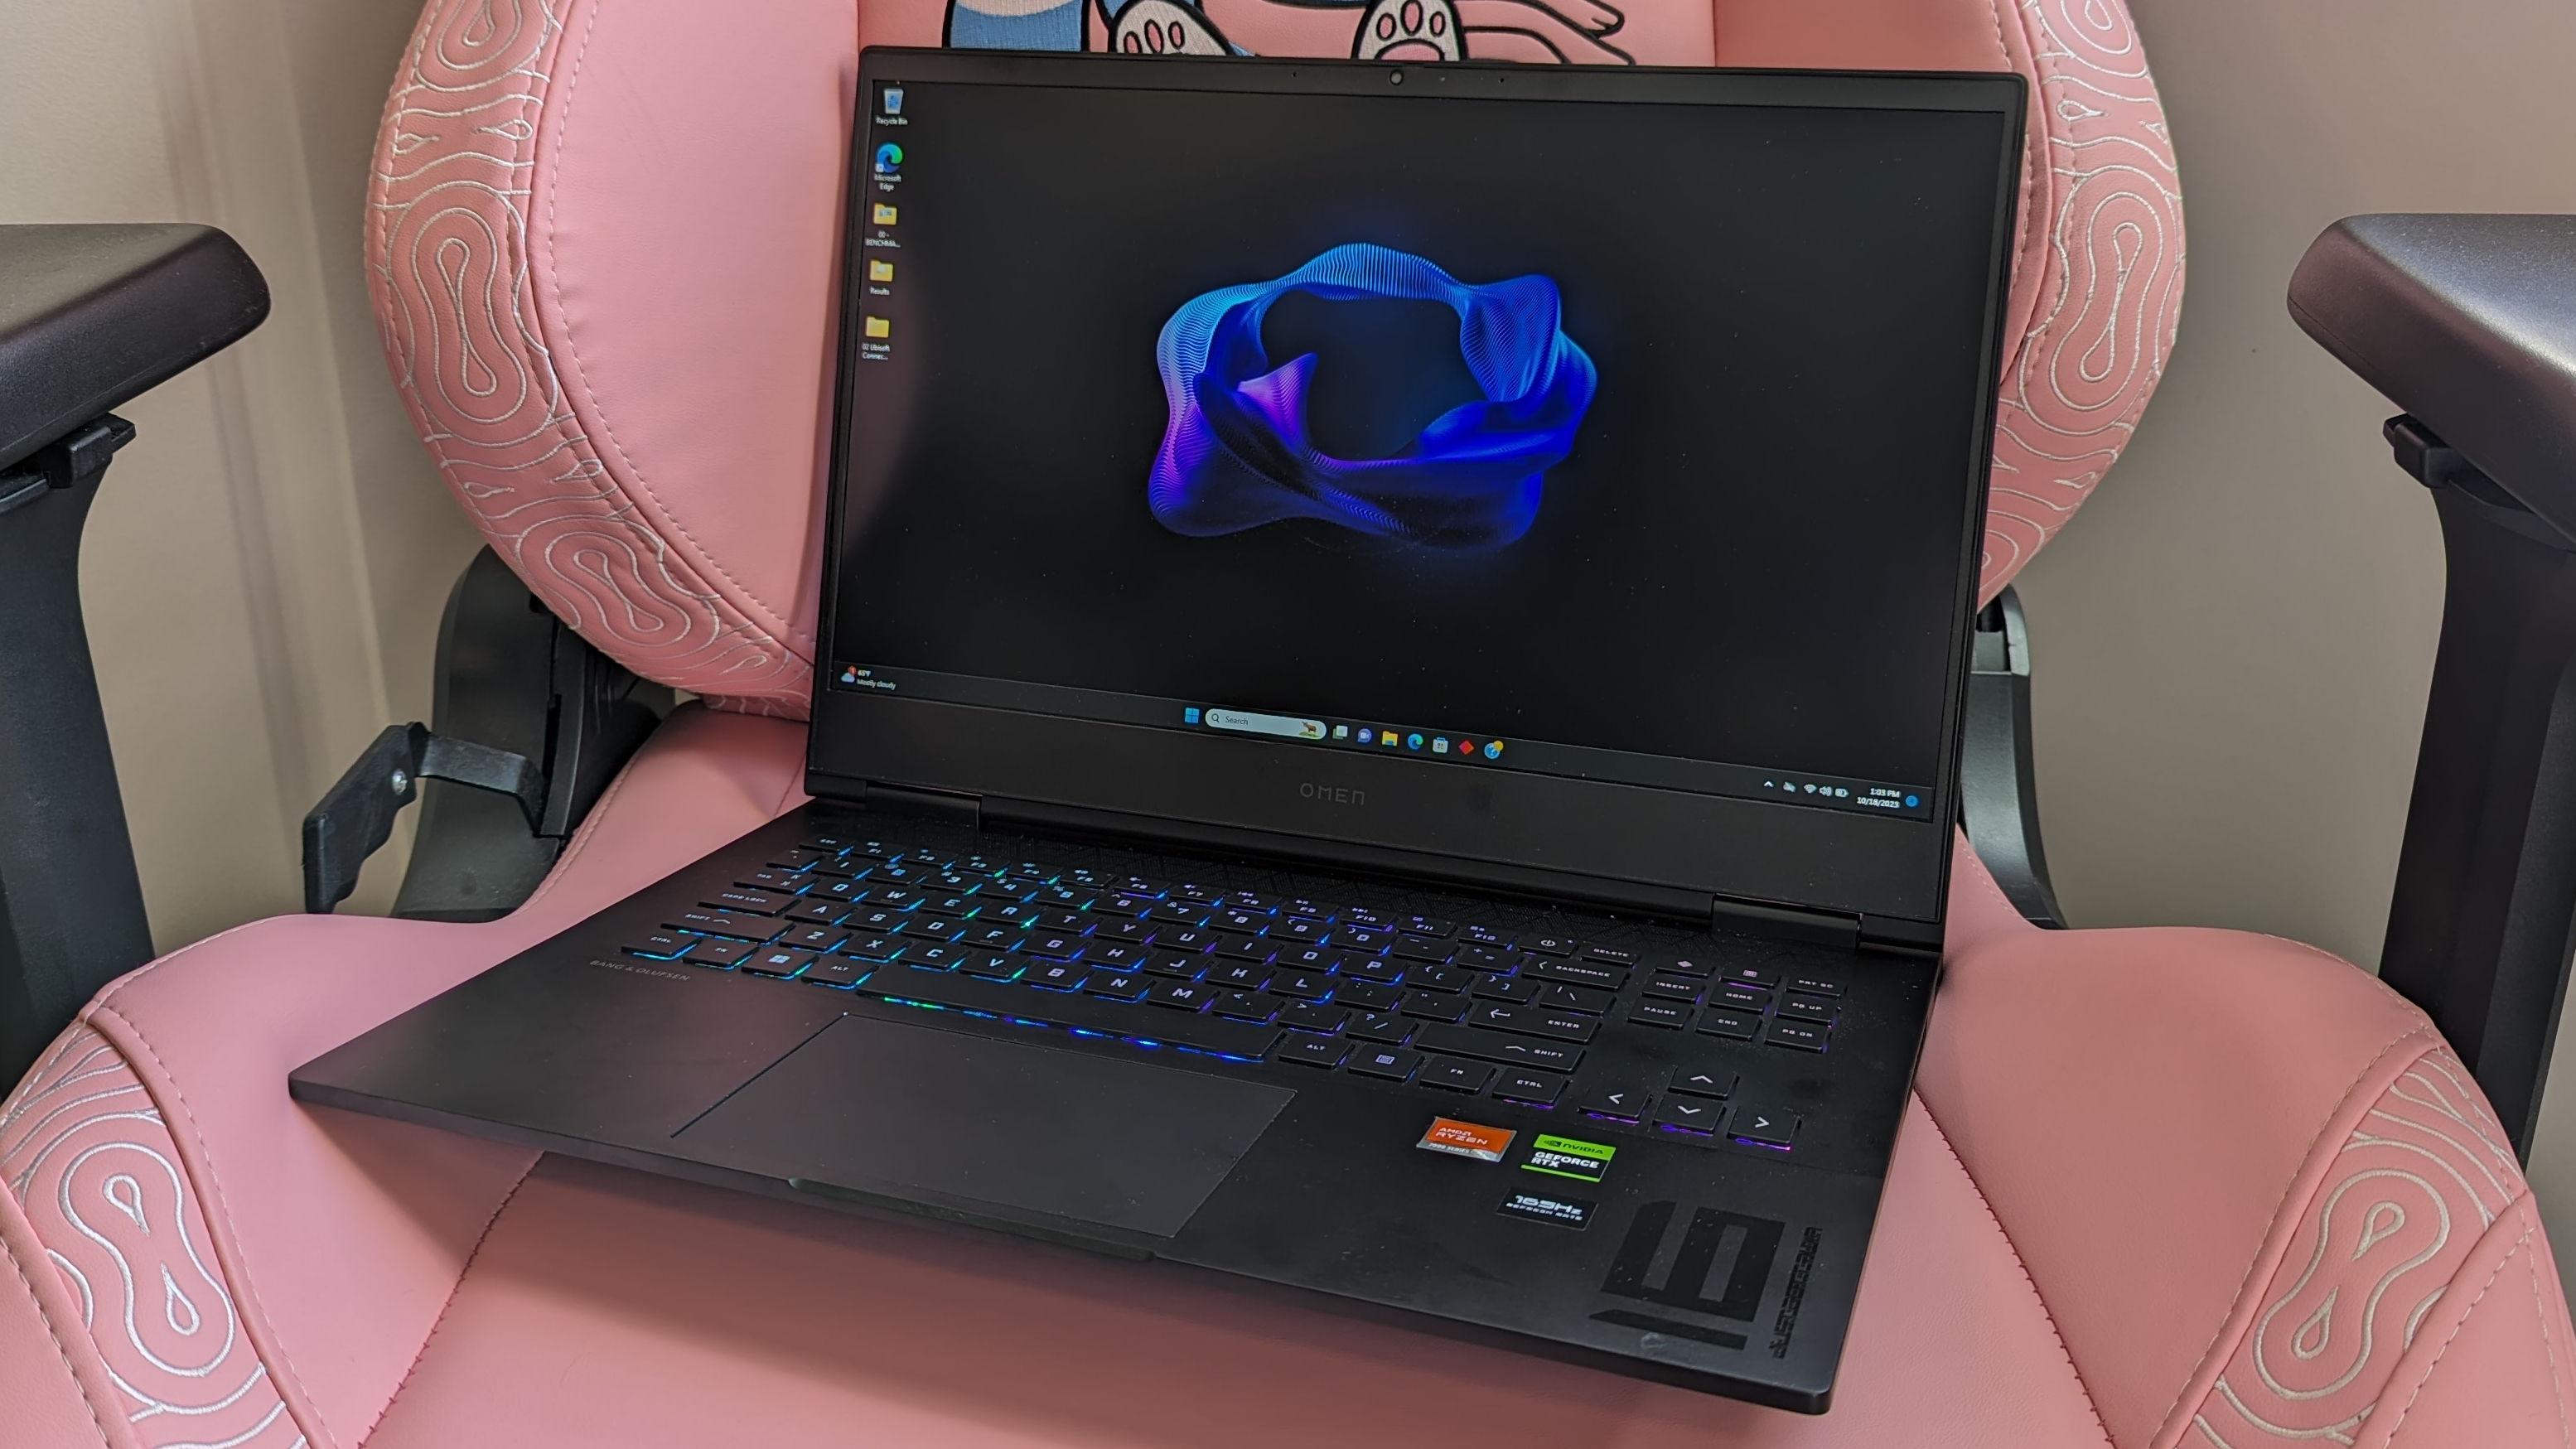 3 affordable gaming laptops for Sims 4 that are powerful enough for mods